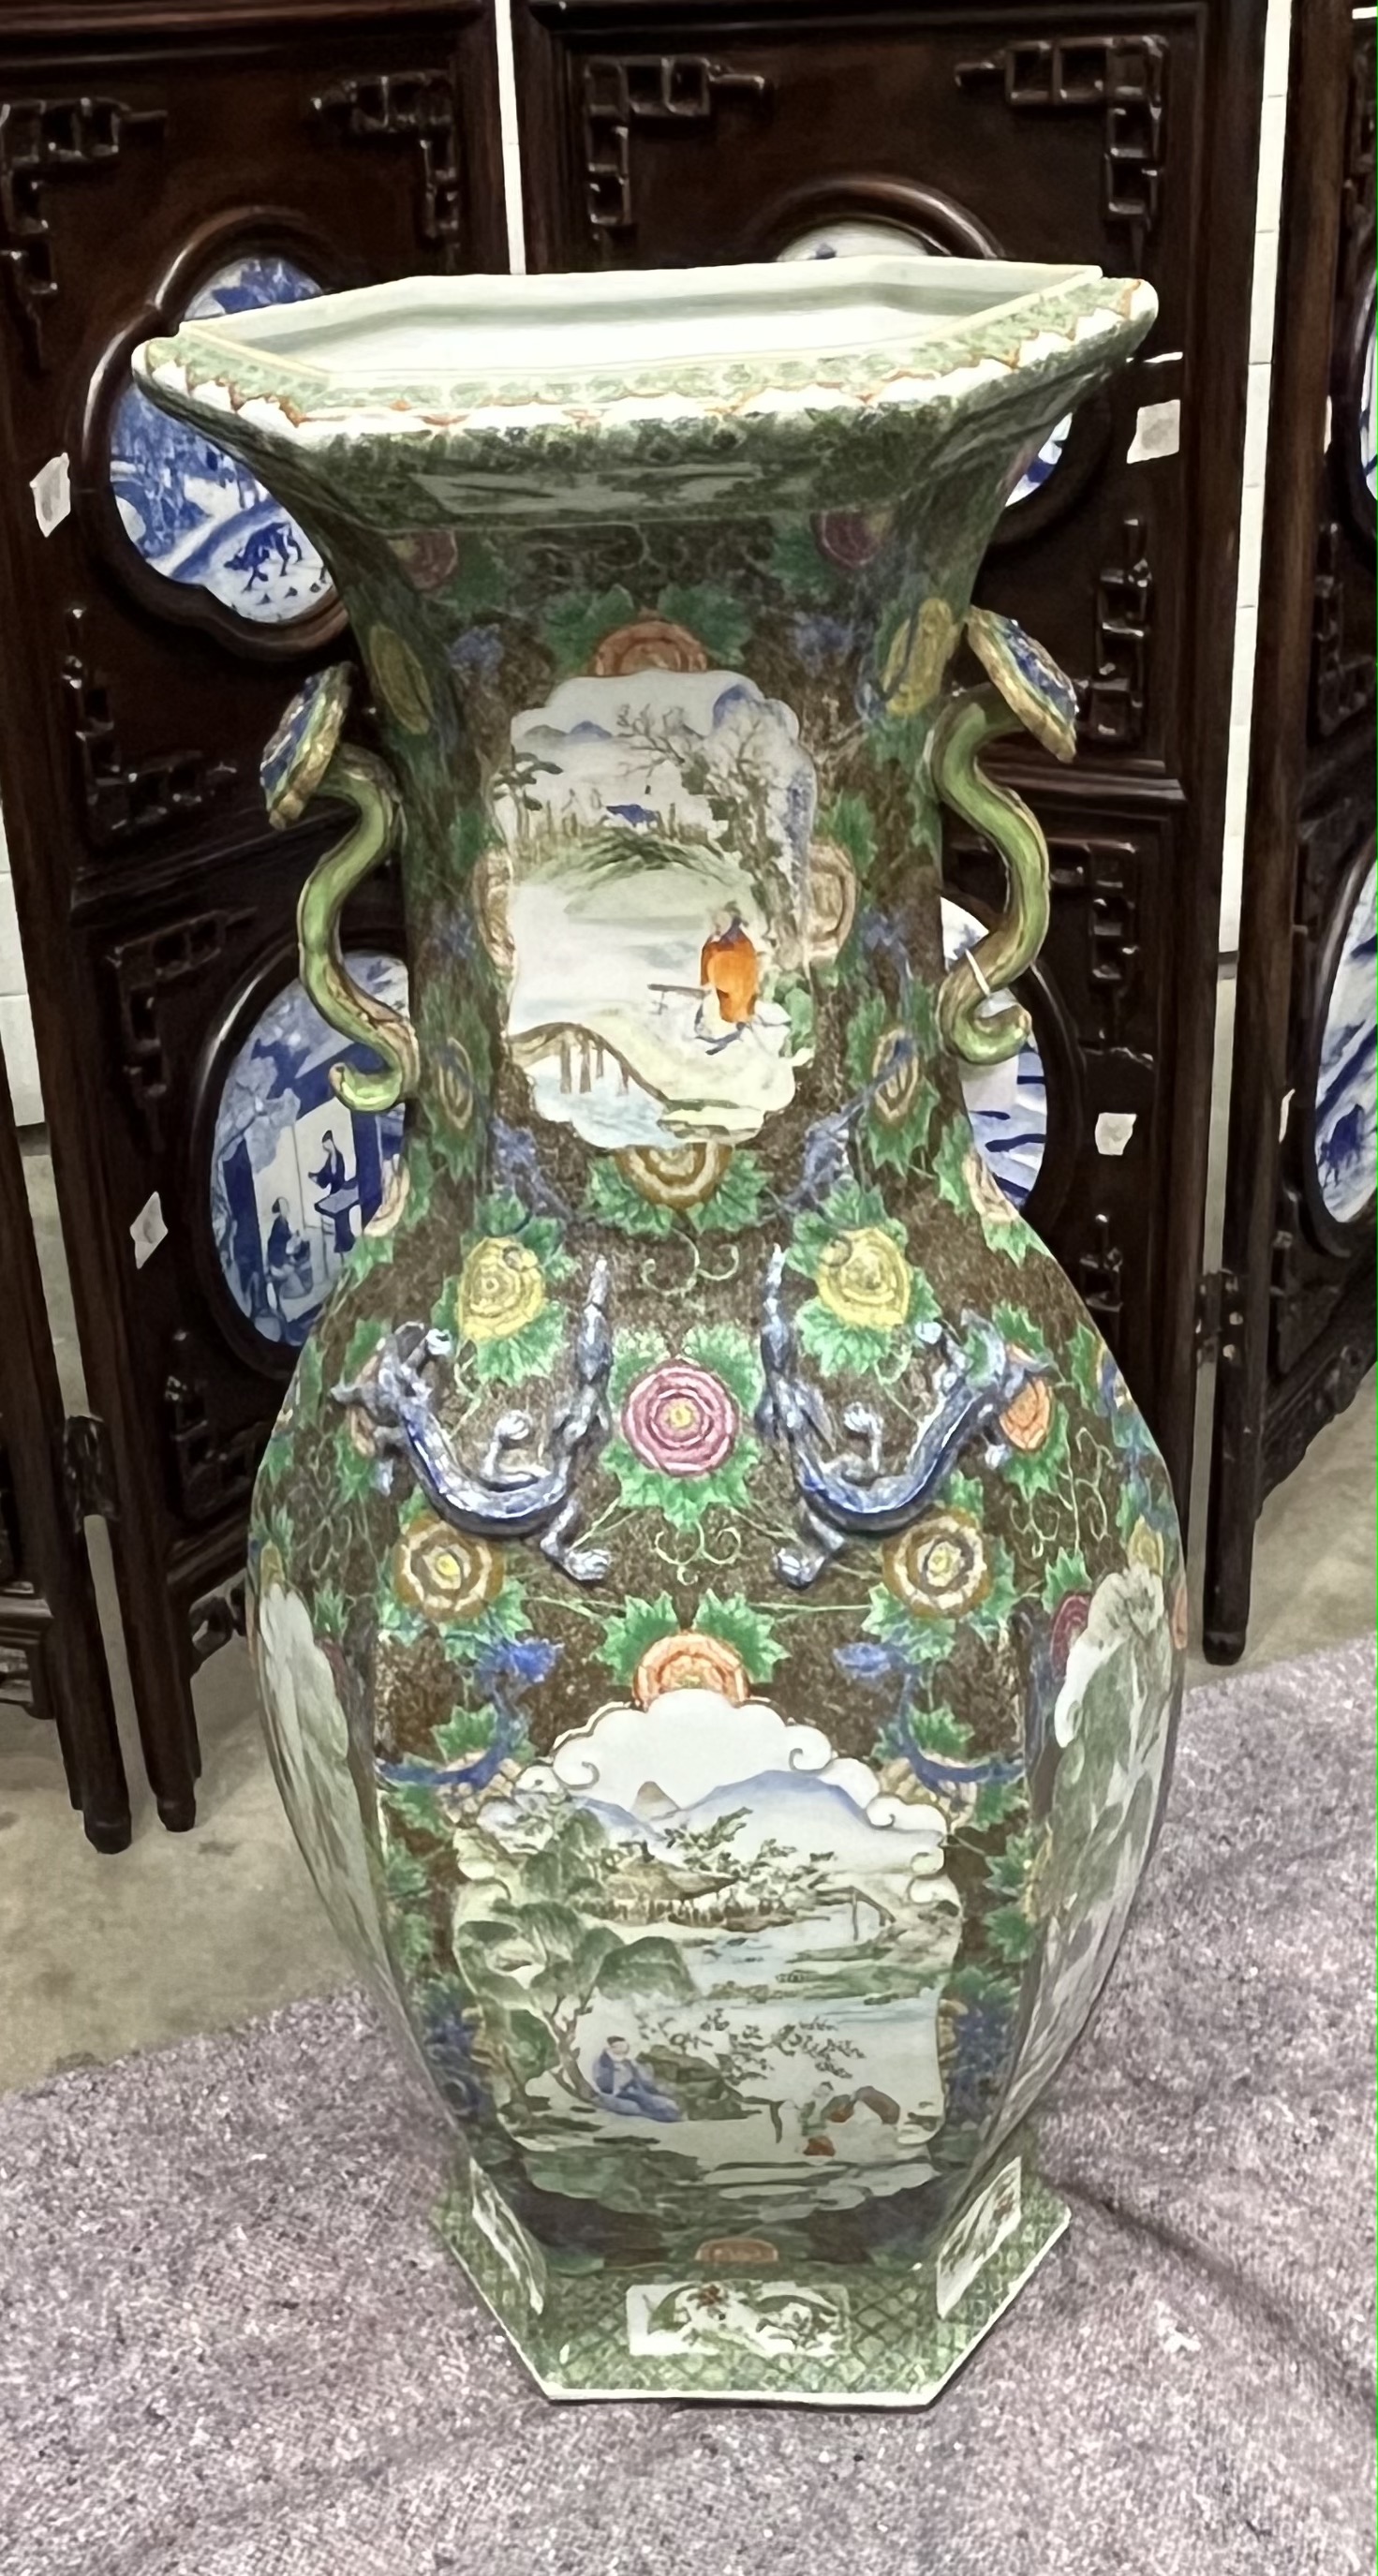 A LARGE CHINESE ‘FAMILLE-ROSE’ PORCELAIN HEXAGONAL VASE, QING DYNASTY, 19TH CENTURY - Image 3 of 9